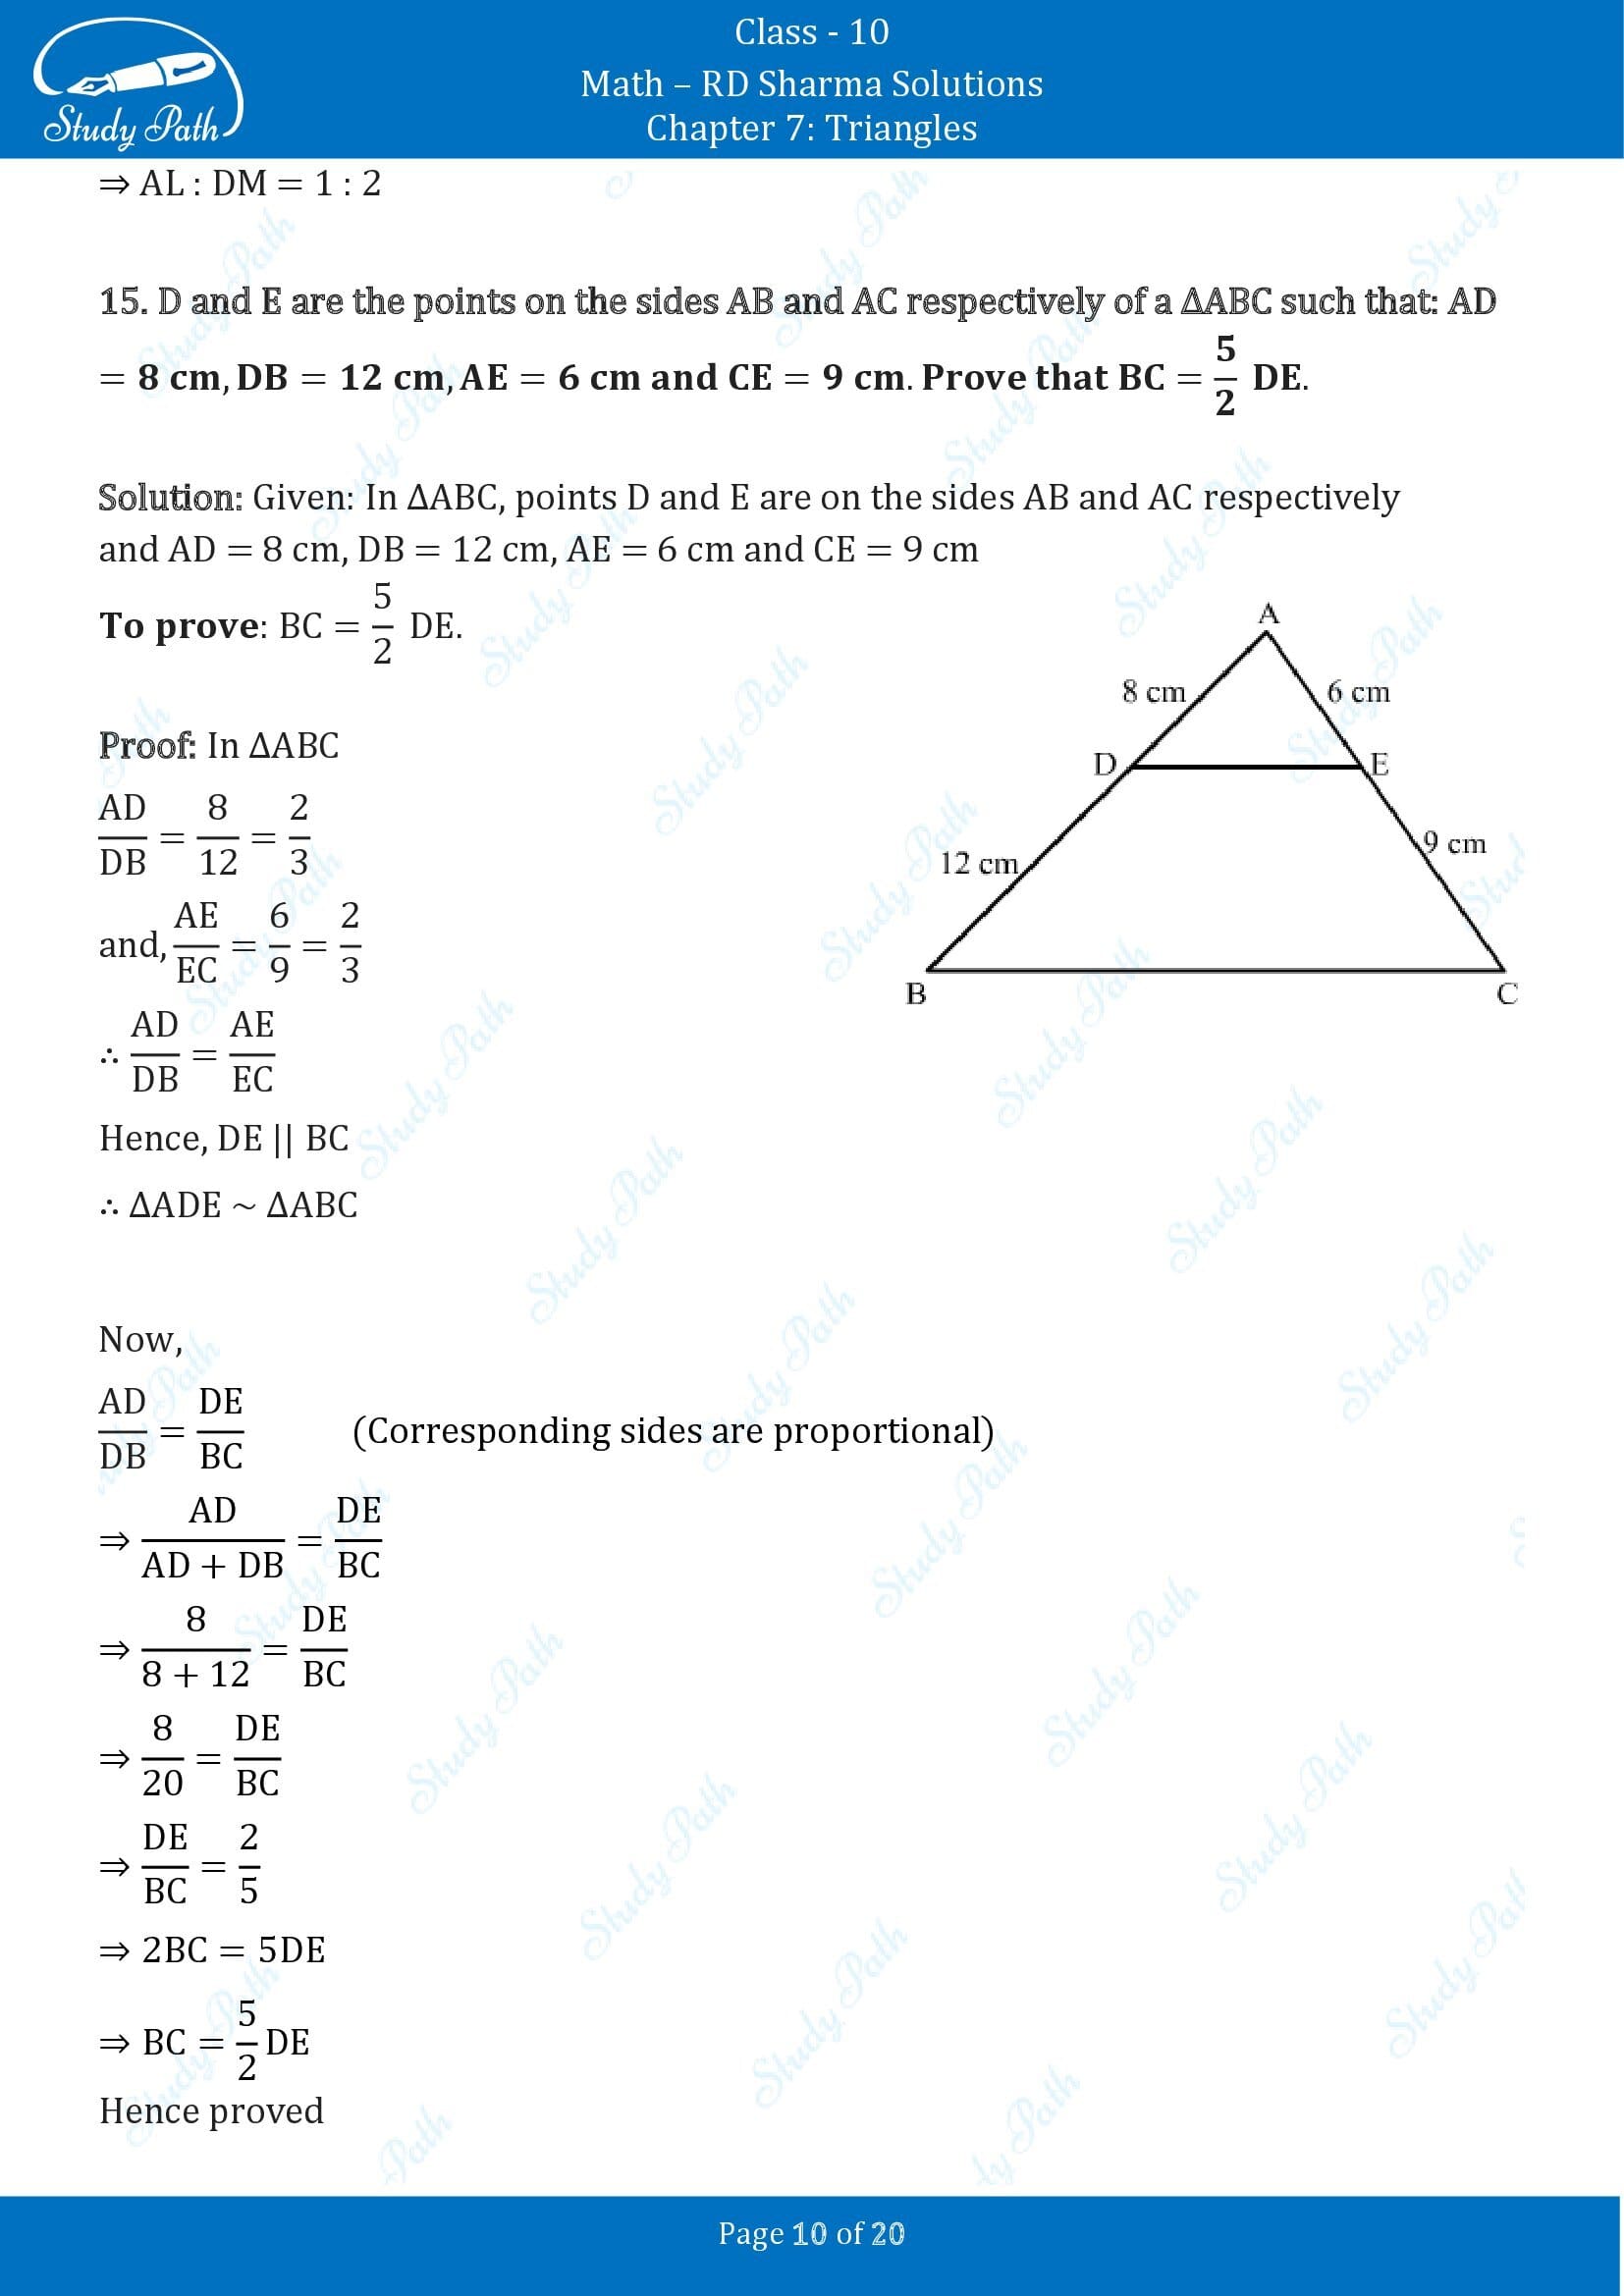 RD Sharma Solutions Class 10 Chapter 7 Triangles Exercise 7.5 00010